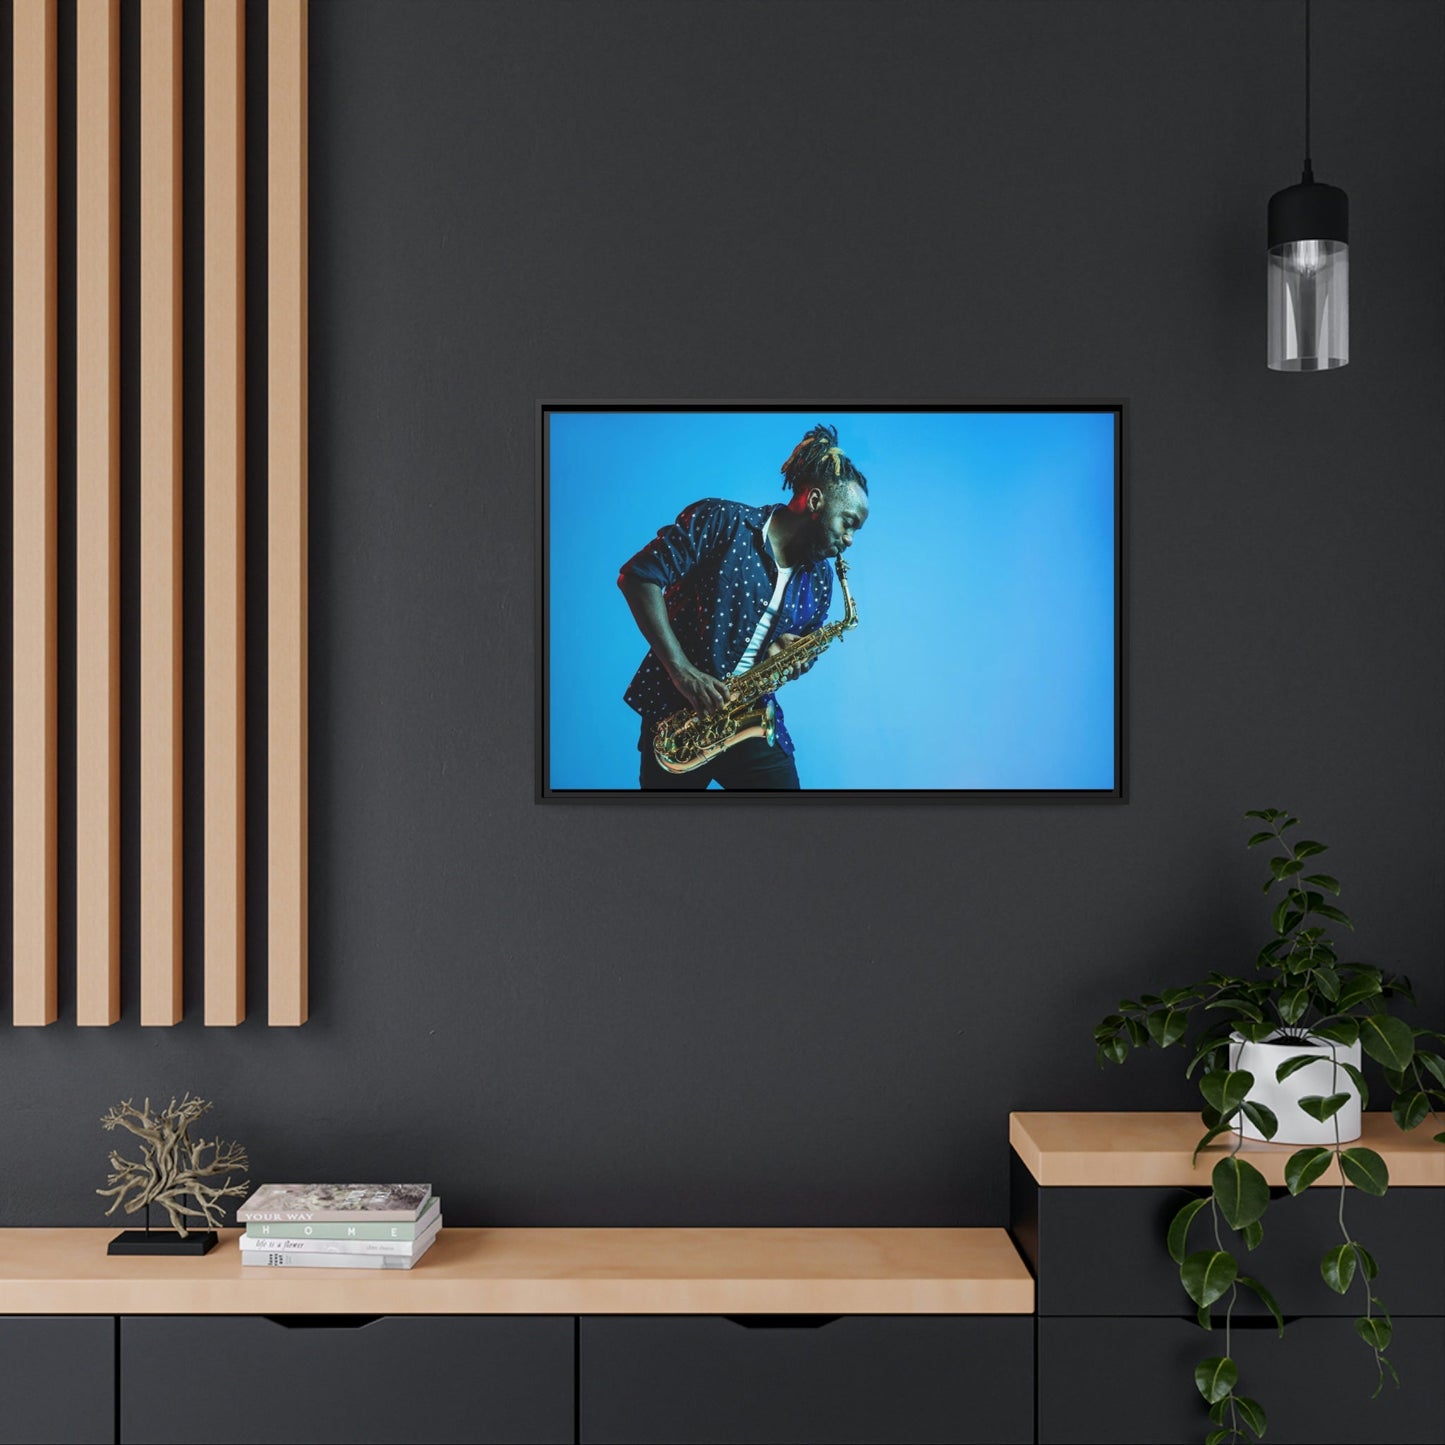 Soulful Sounds: Blues Music Poster and Canvas Prints for Wall Art